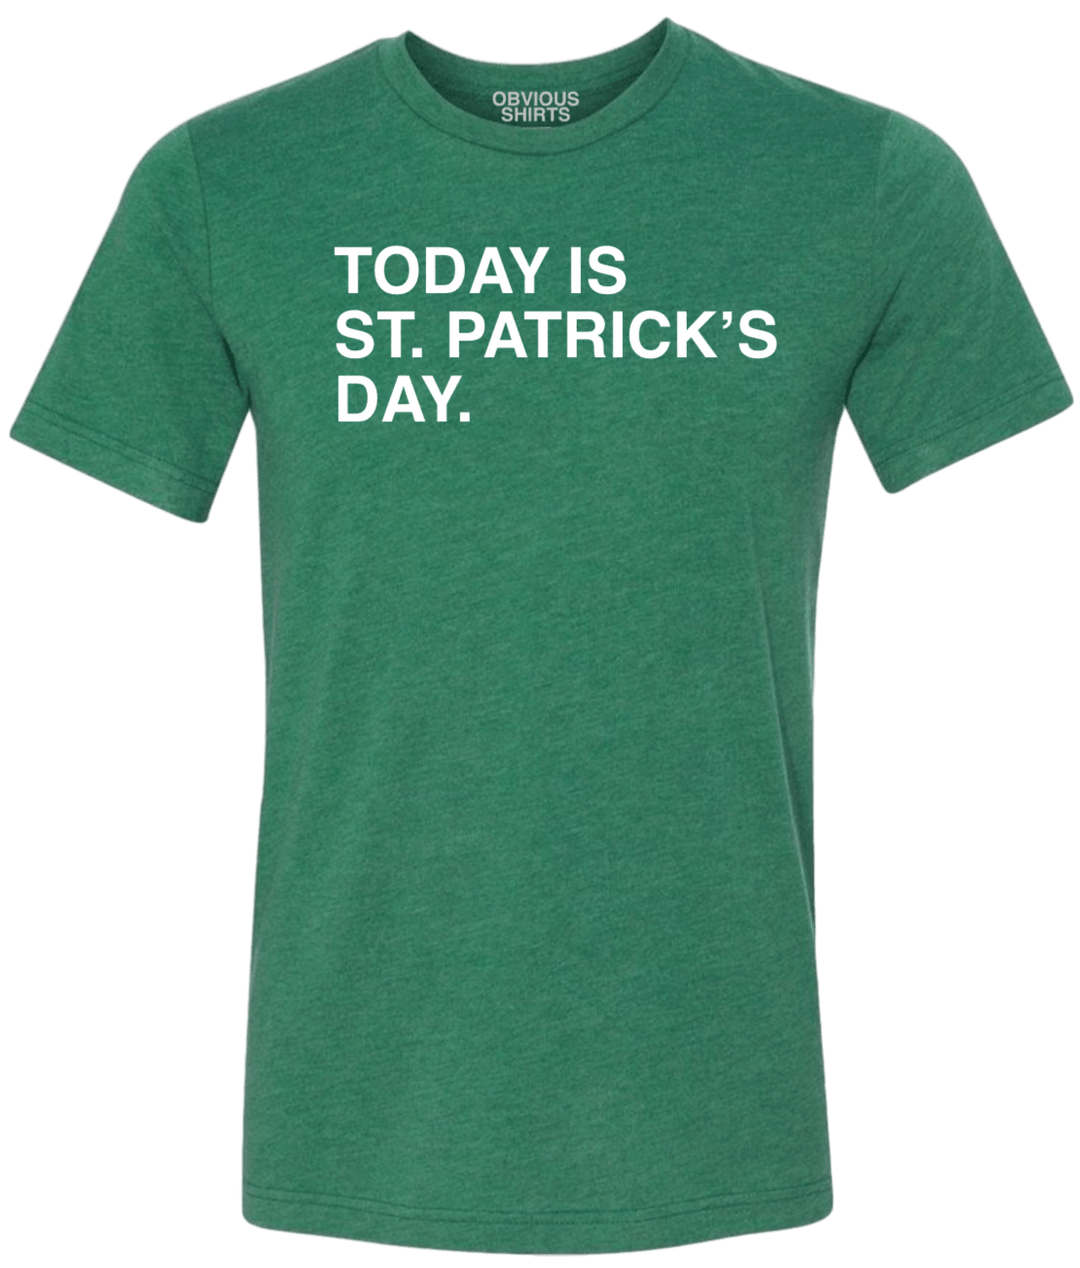 TODAY IS ST. PATRICK'S DAY. - OBVIOUS SHIRTS